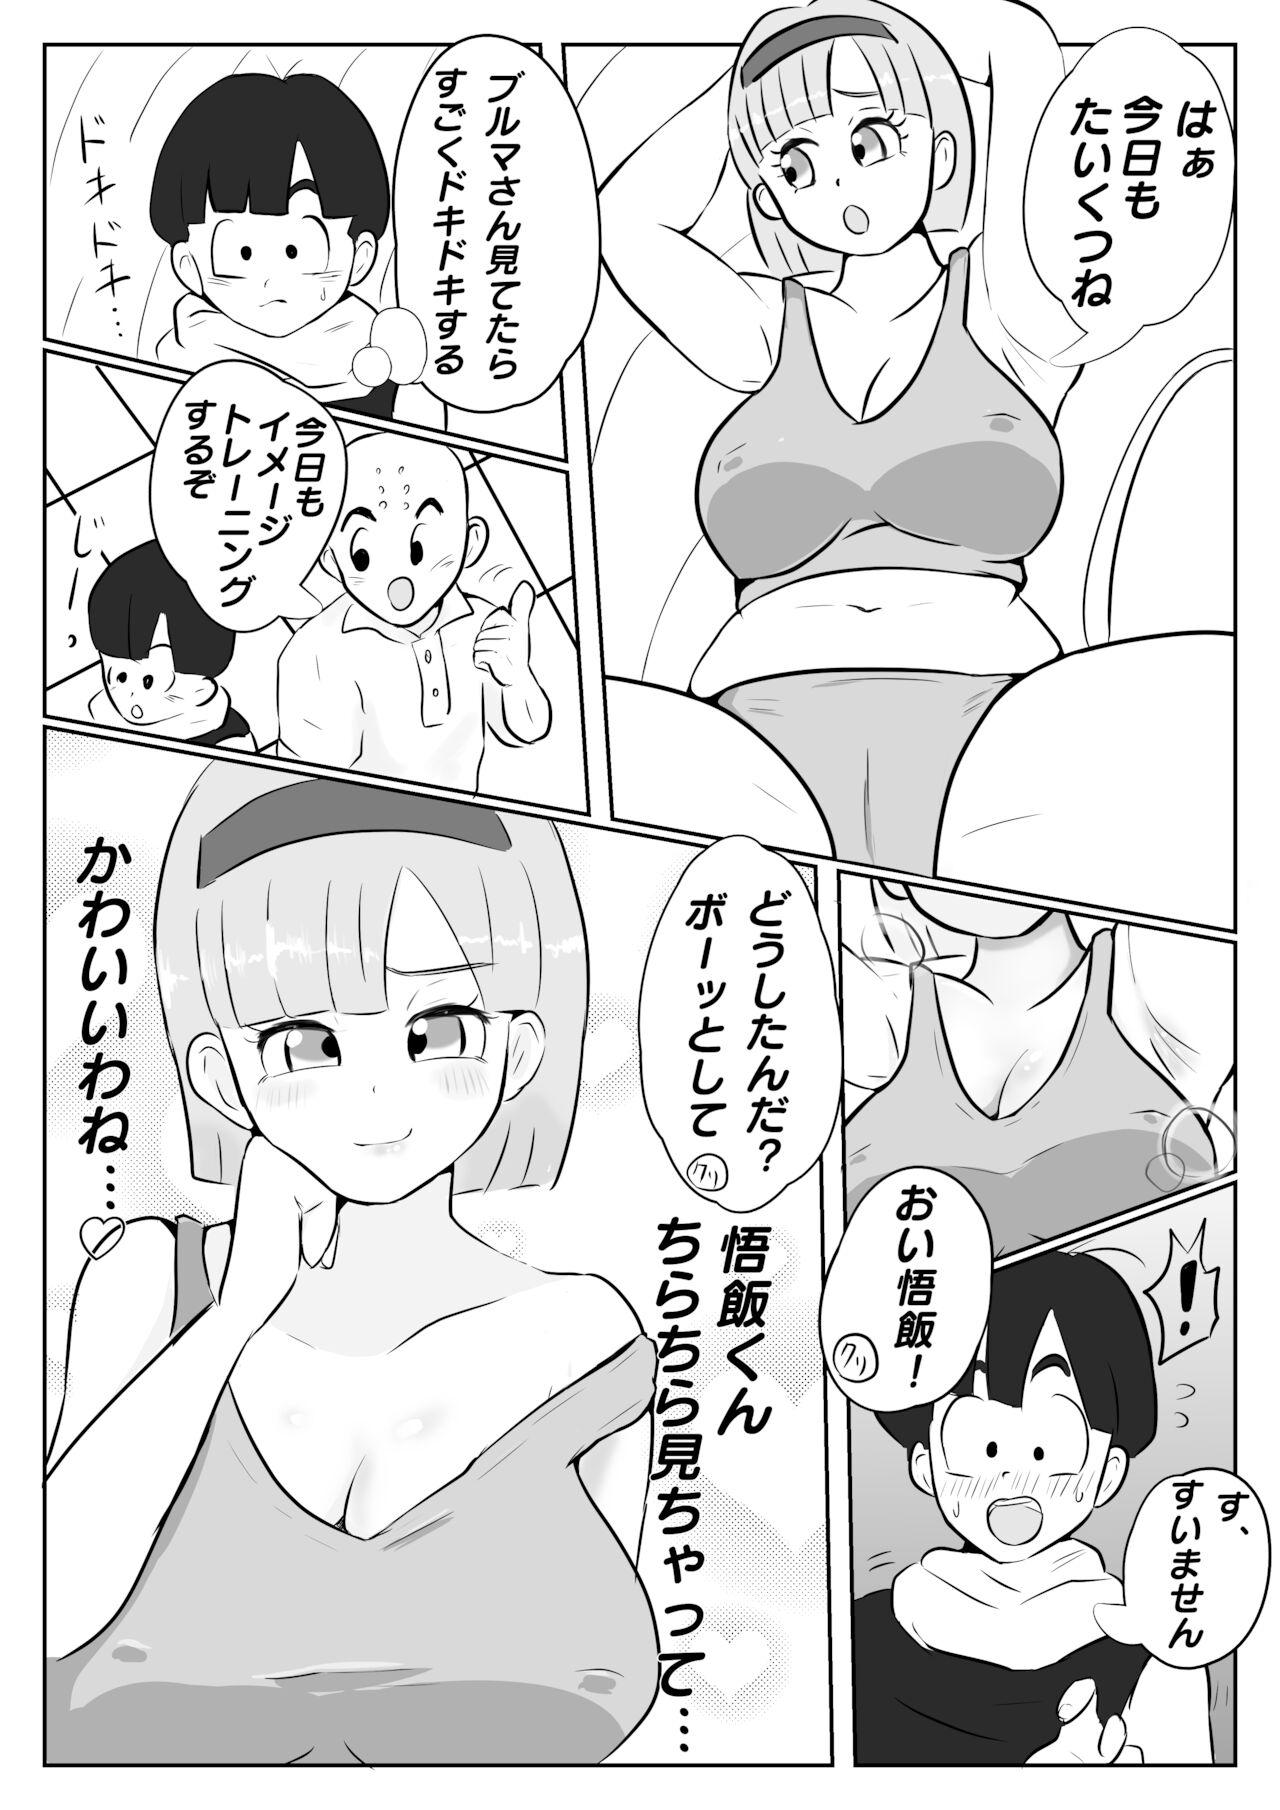 Hermana Why Gohan was thrilled to planet Namek - Dragon ball z Milf Cougar - Page 6